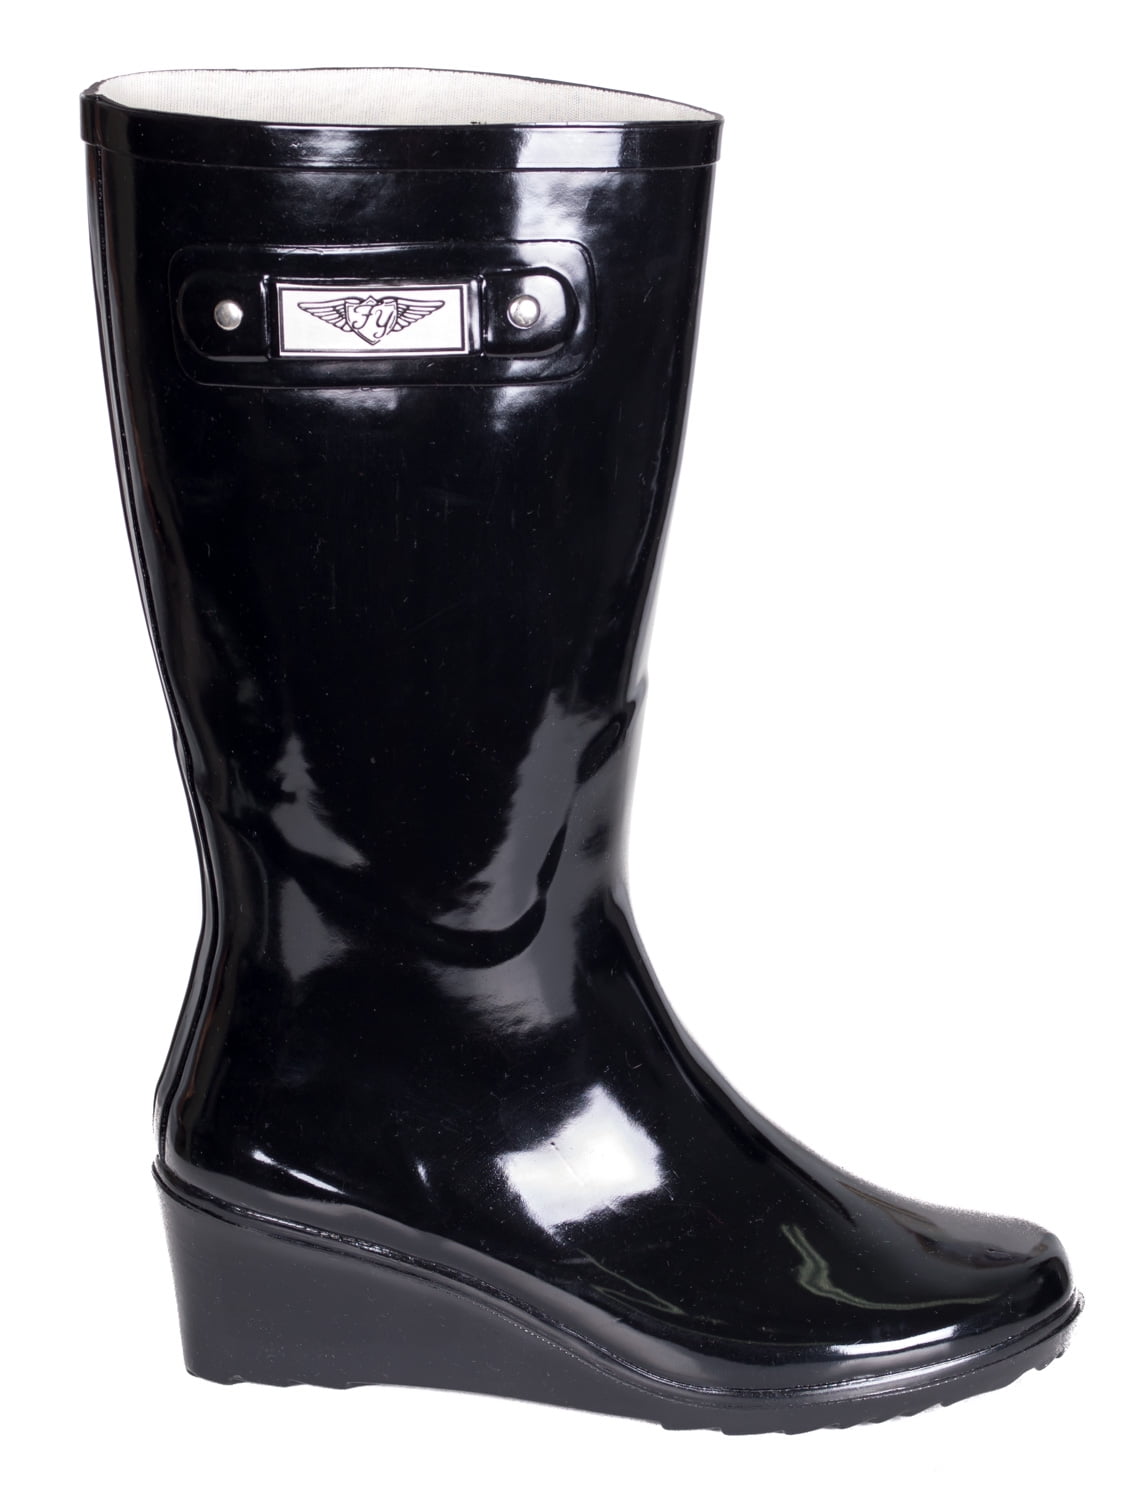 rubber wedge boots